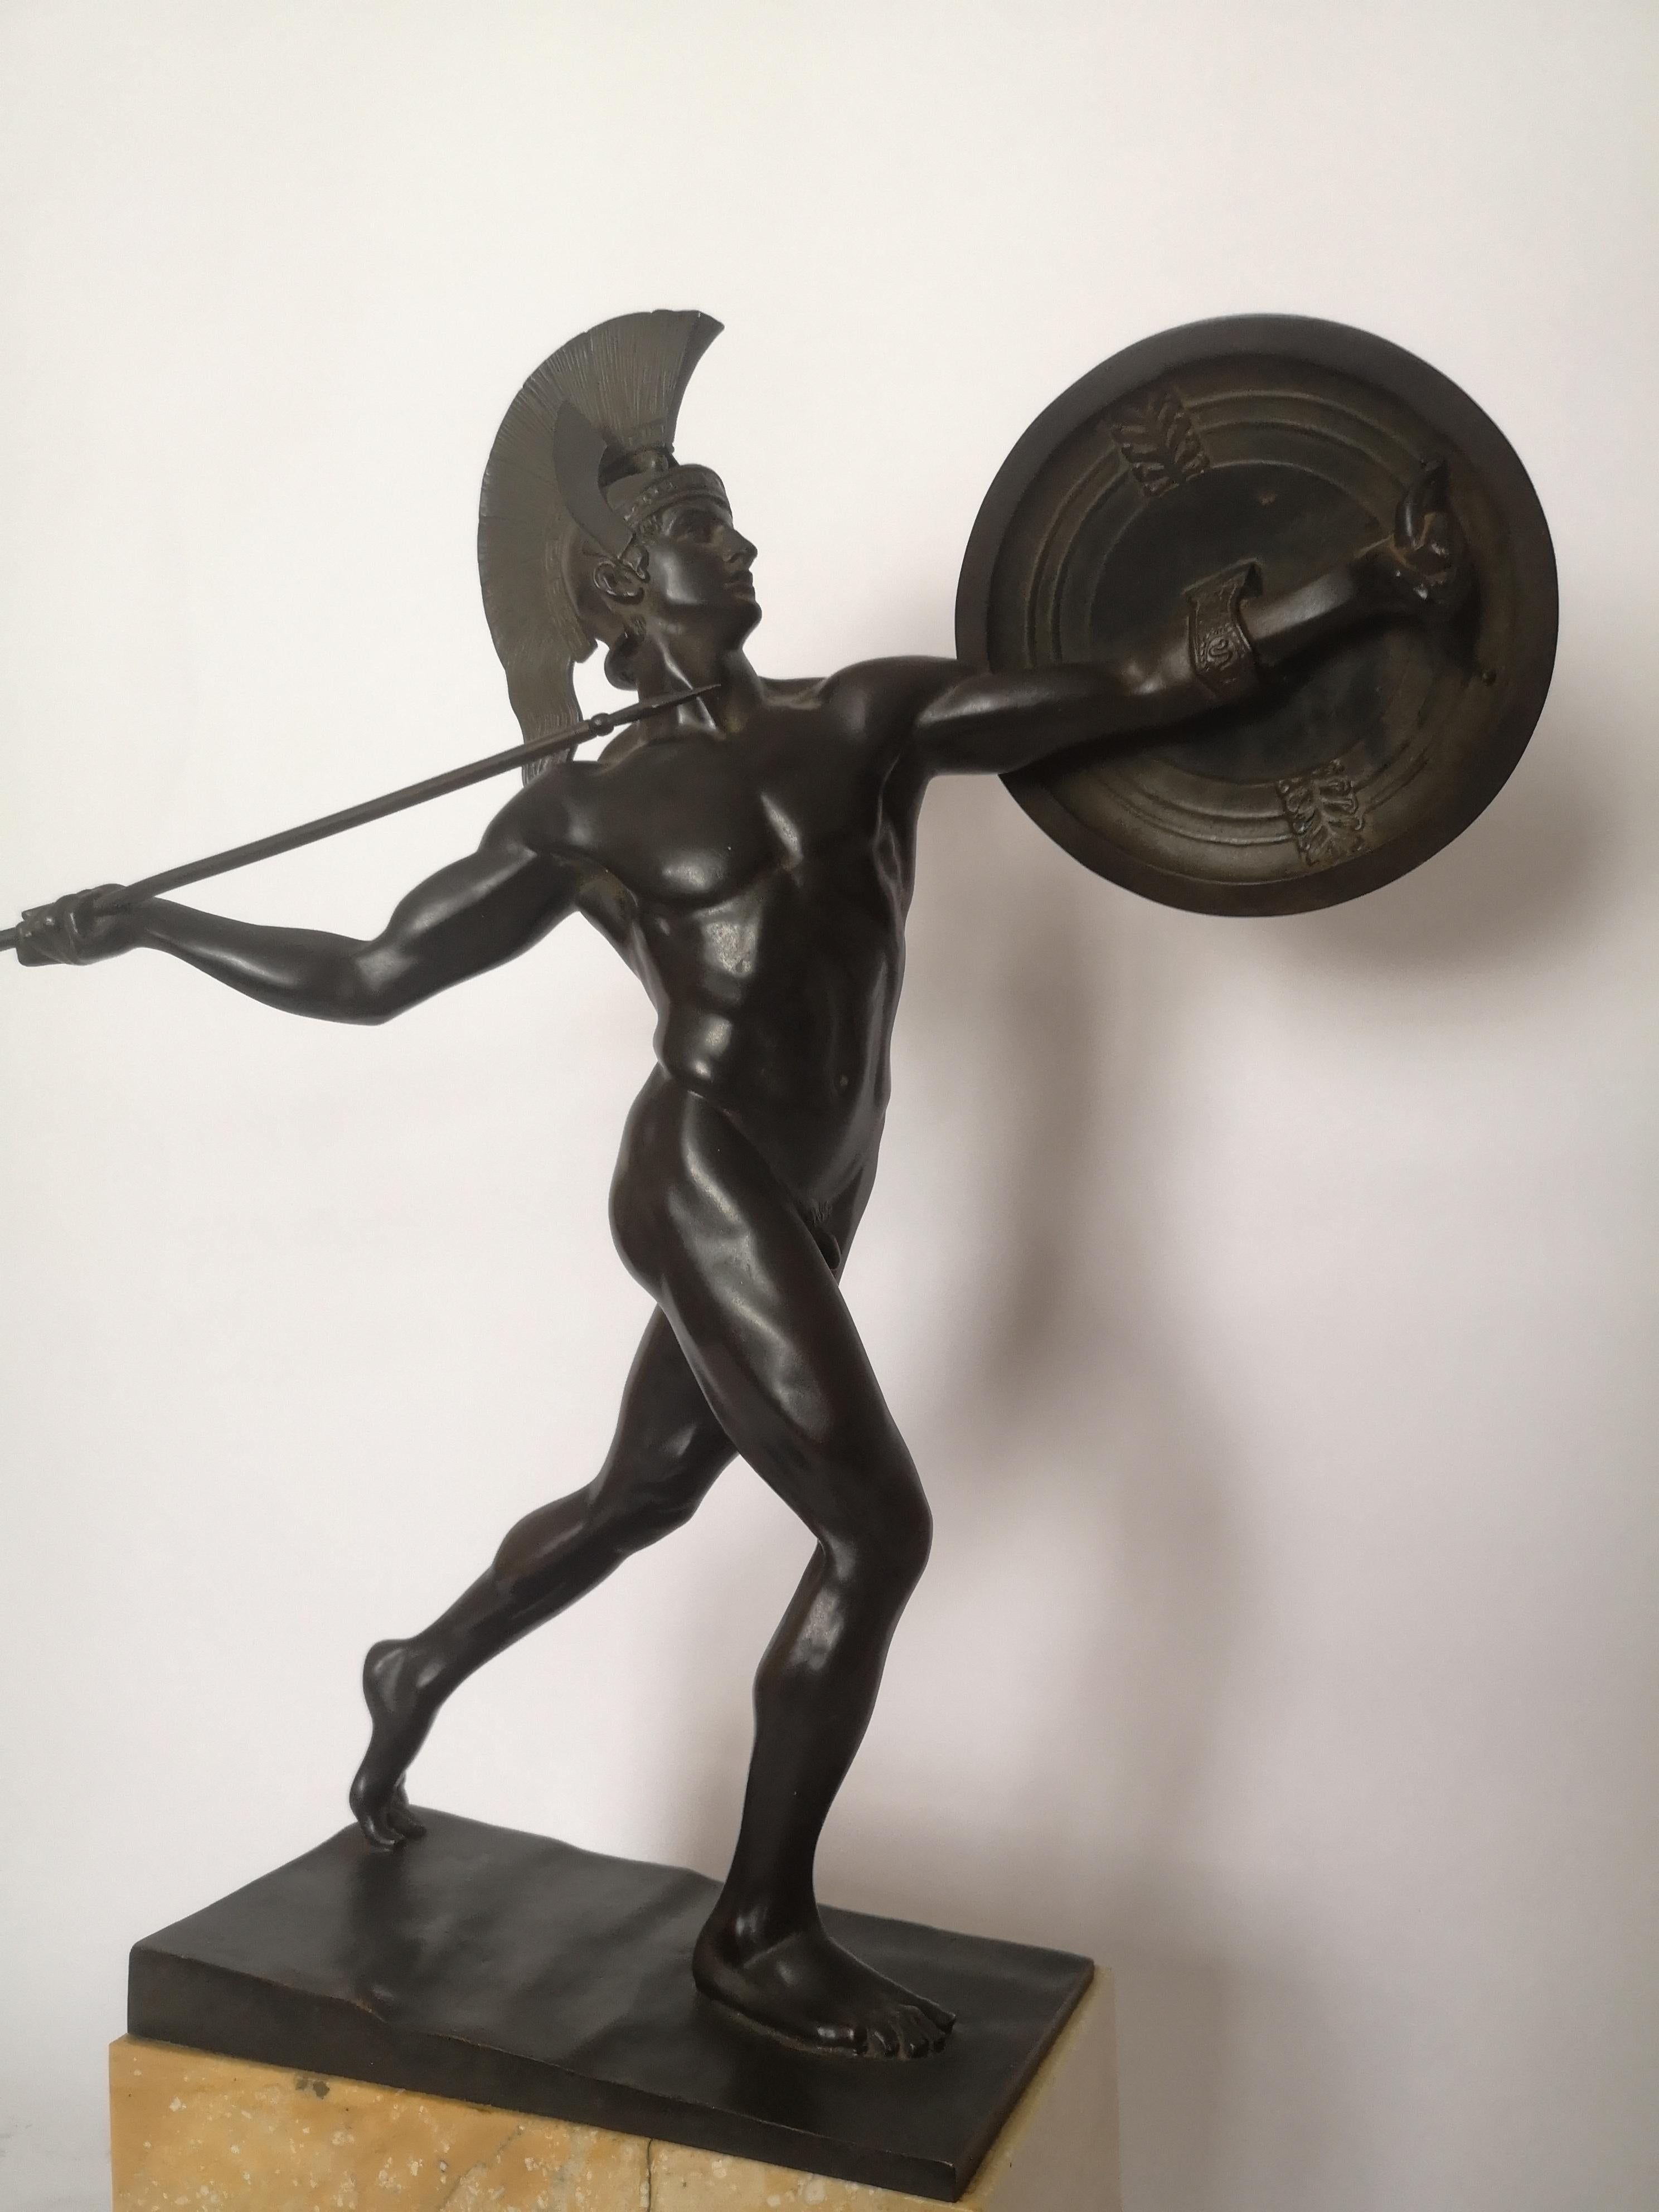 This bronze depiction of Greek mythology figure Achilles, hero of the Trojan war. Shown here in bronze in an action position with spear poised in his right hand and his shield, bearing a central bull decoration, on his left arm. His helmet imitating